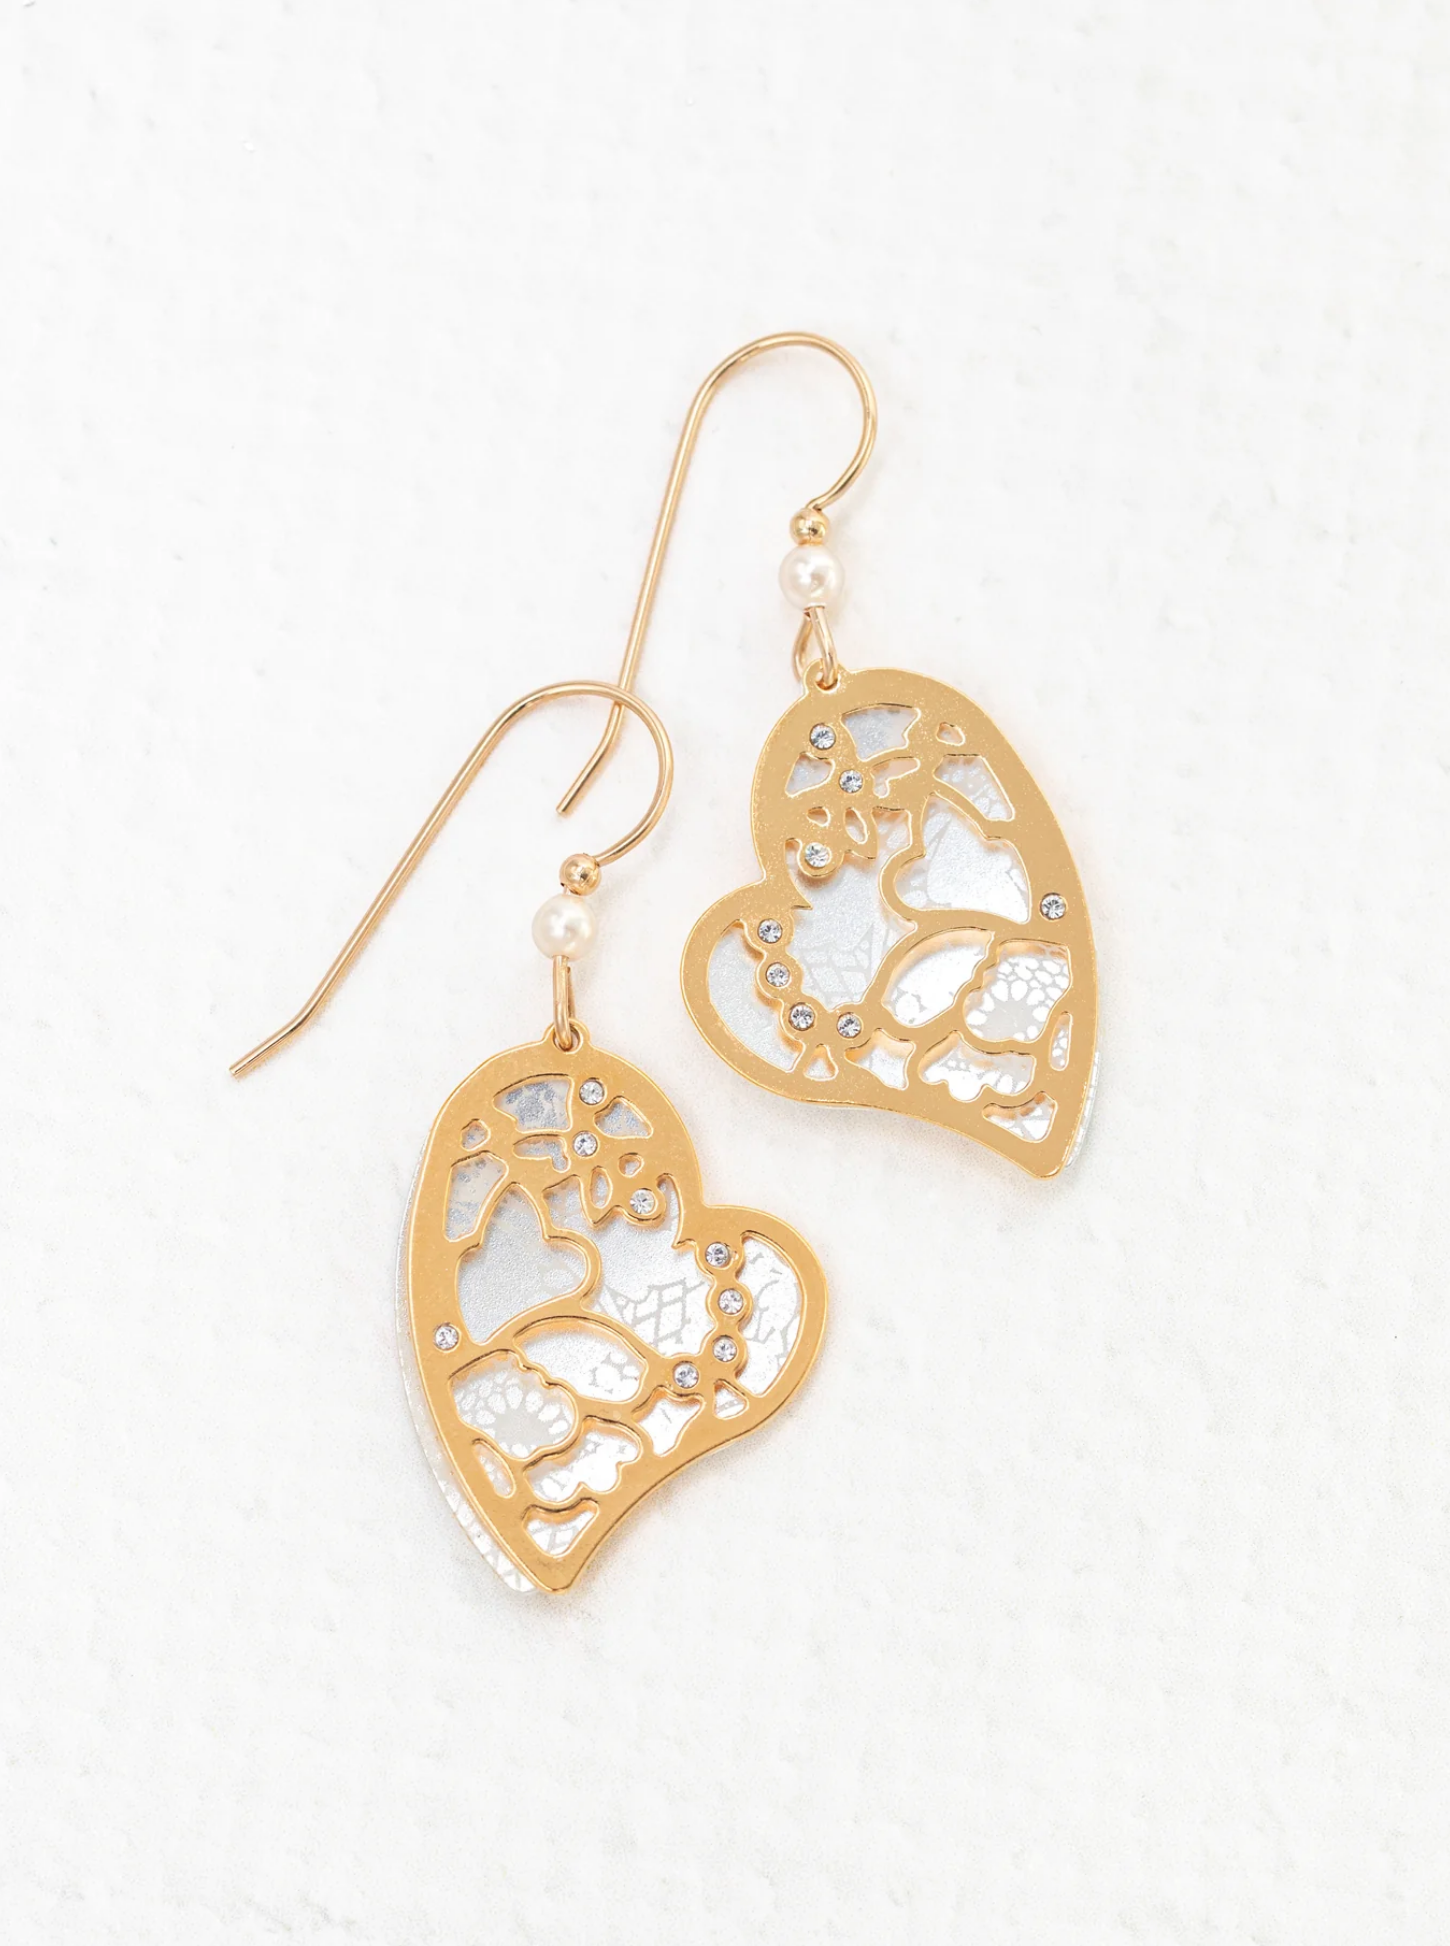 Valena Earrings in Silver & Gold - Heart of the Home LV